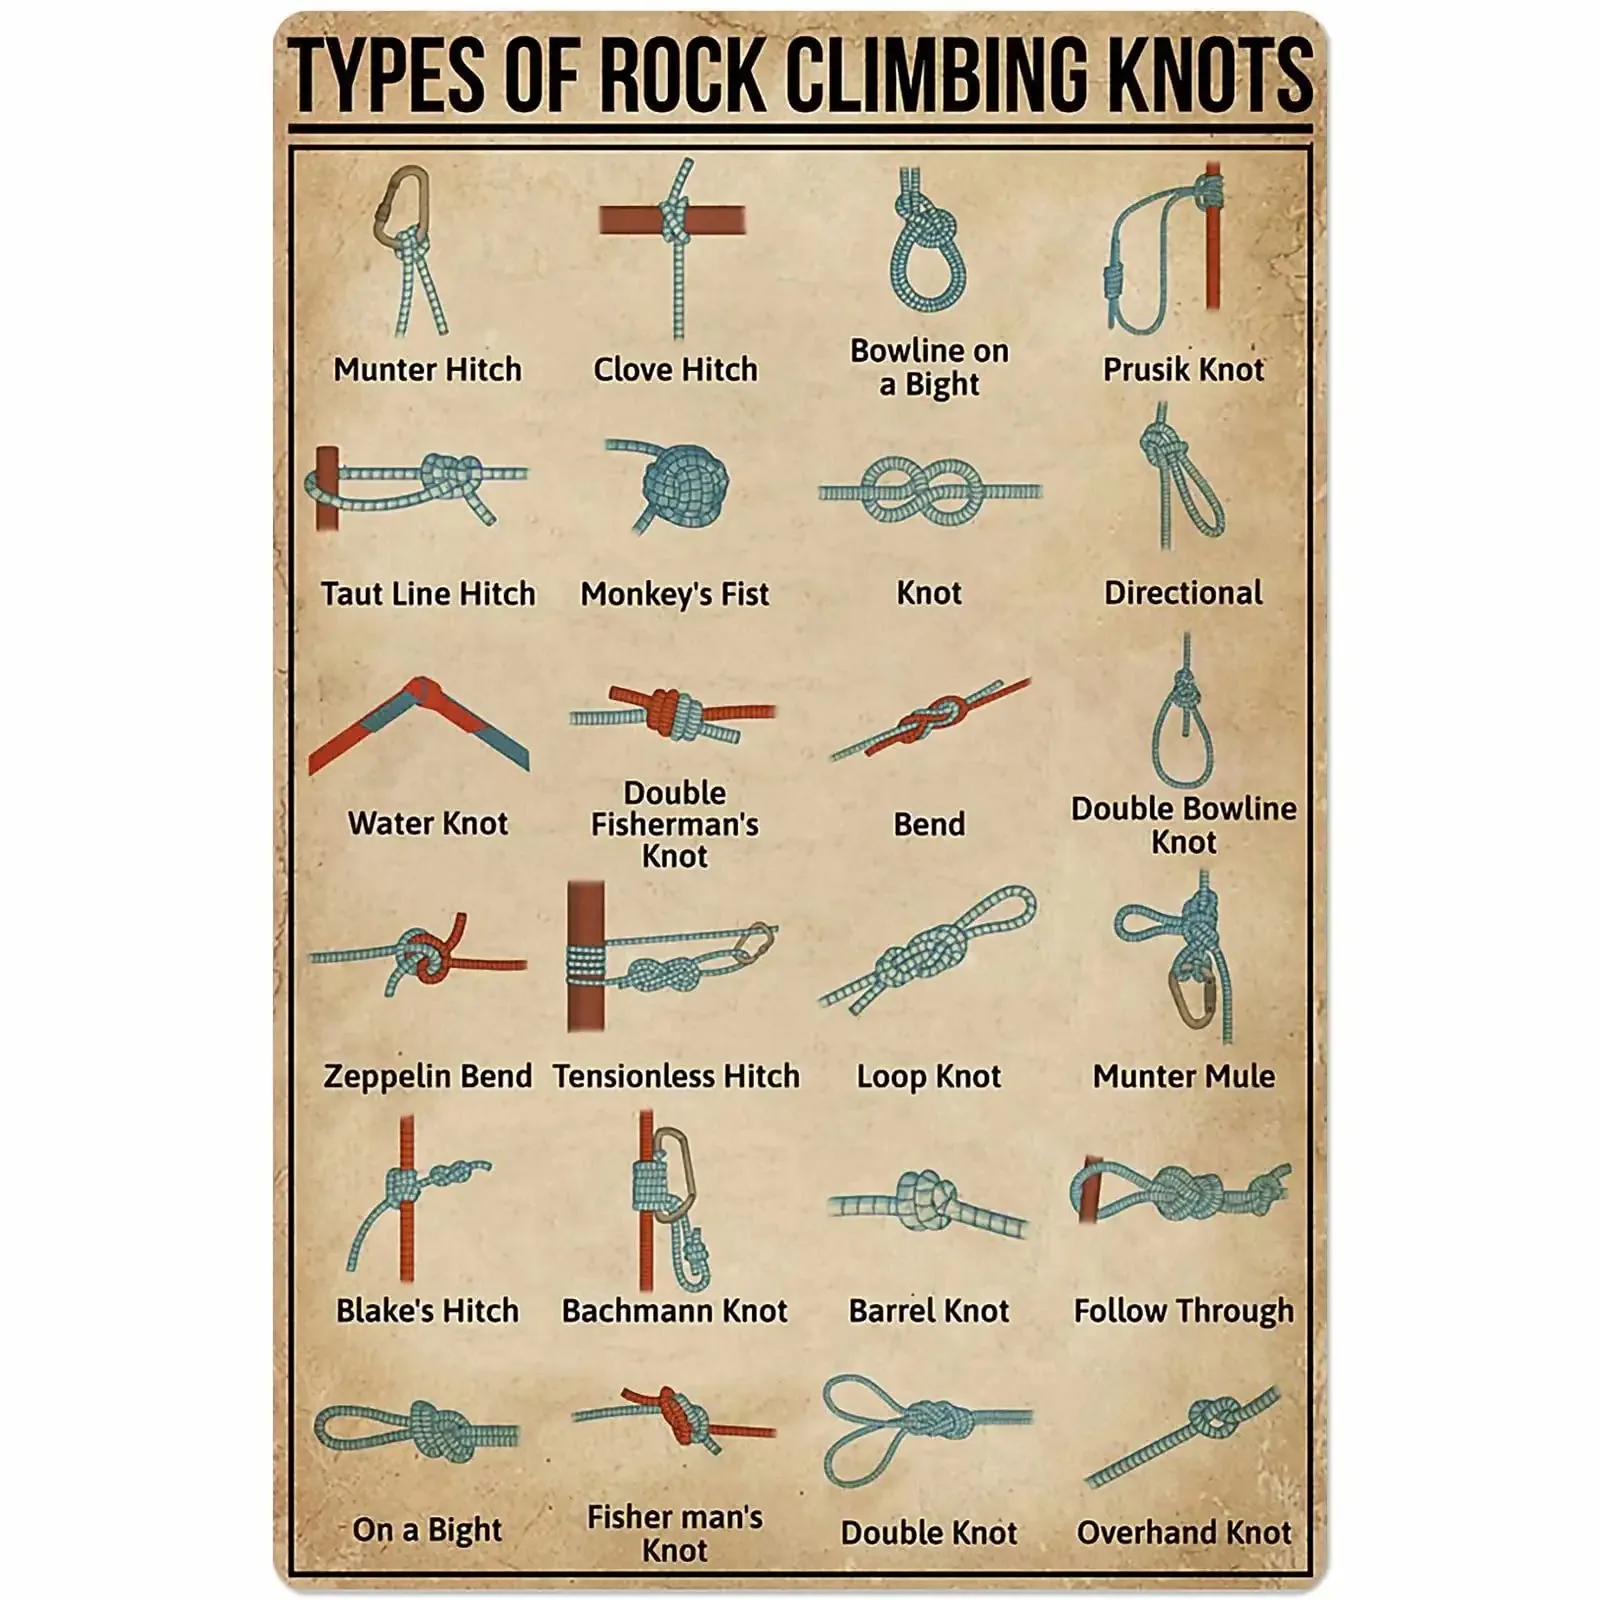 

A Climbing Knowledge Posters Types of Rock Climbing Knots Posters Wall Decor Popular Science Guide Room Decor Bathroom Decor